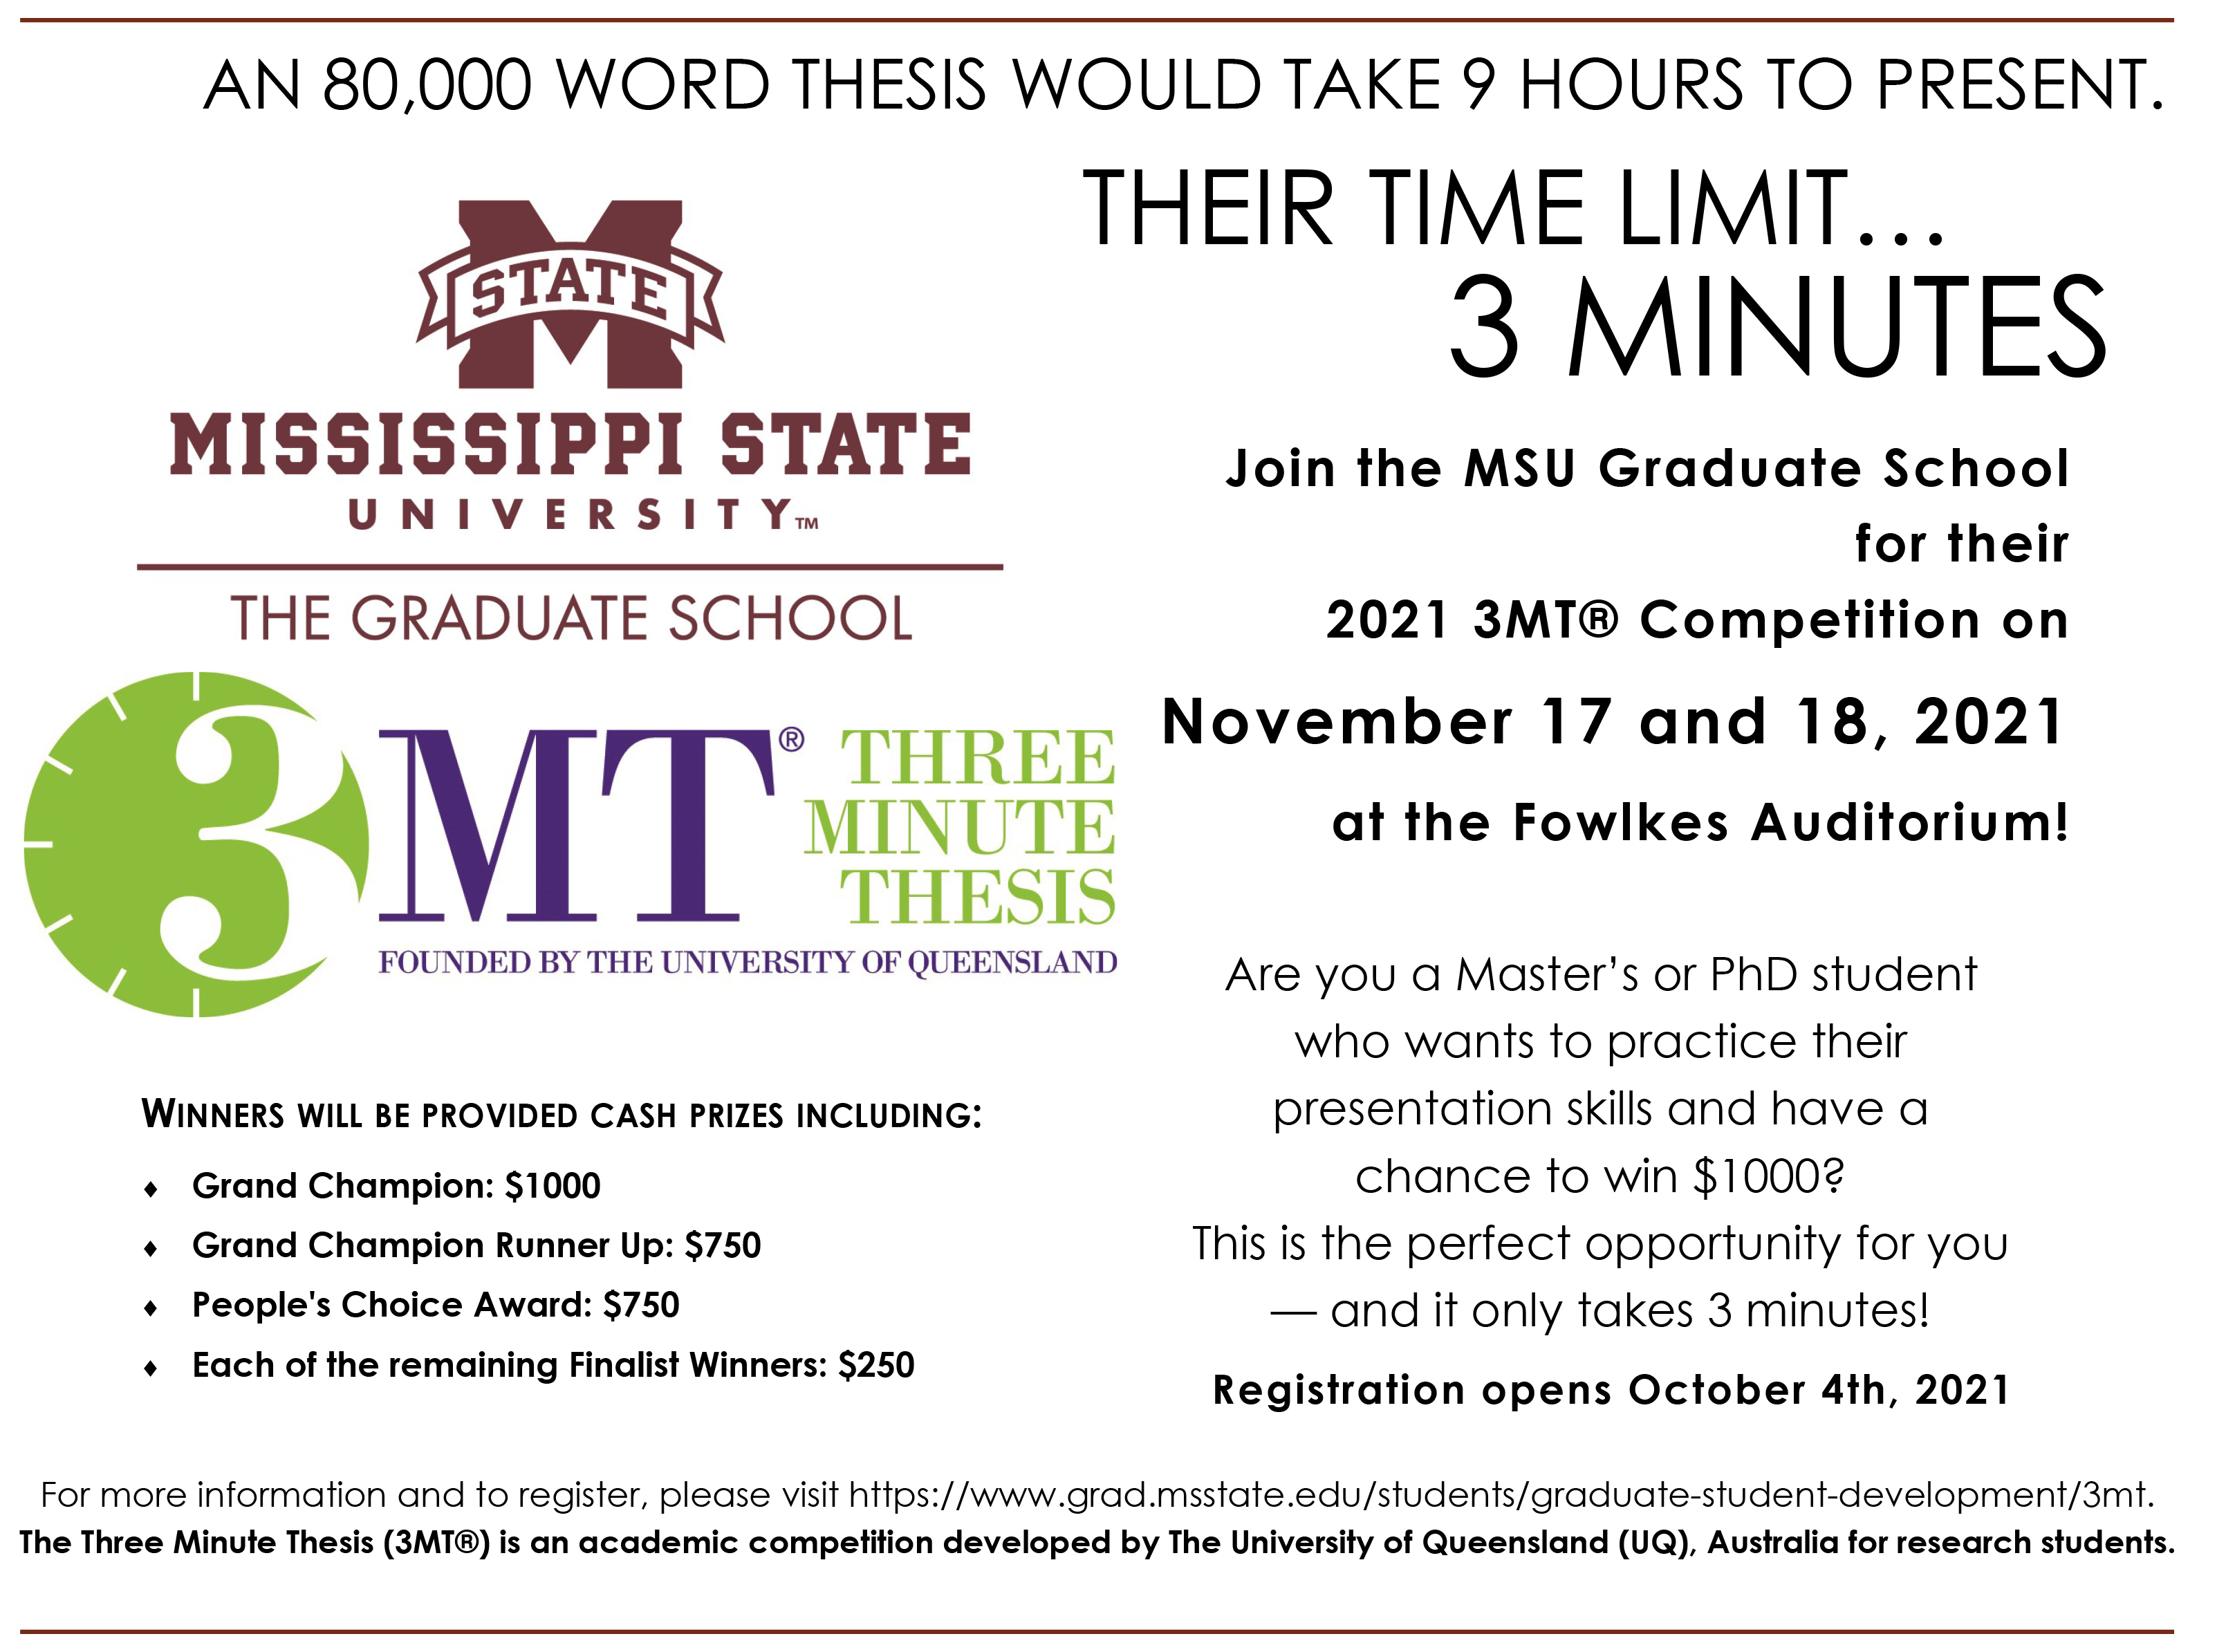 Graphic with details for MSU's 2021 Three Minute Thesis Competition